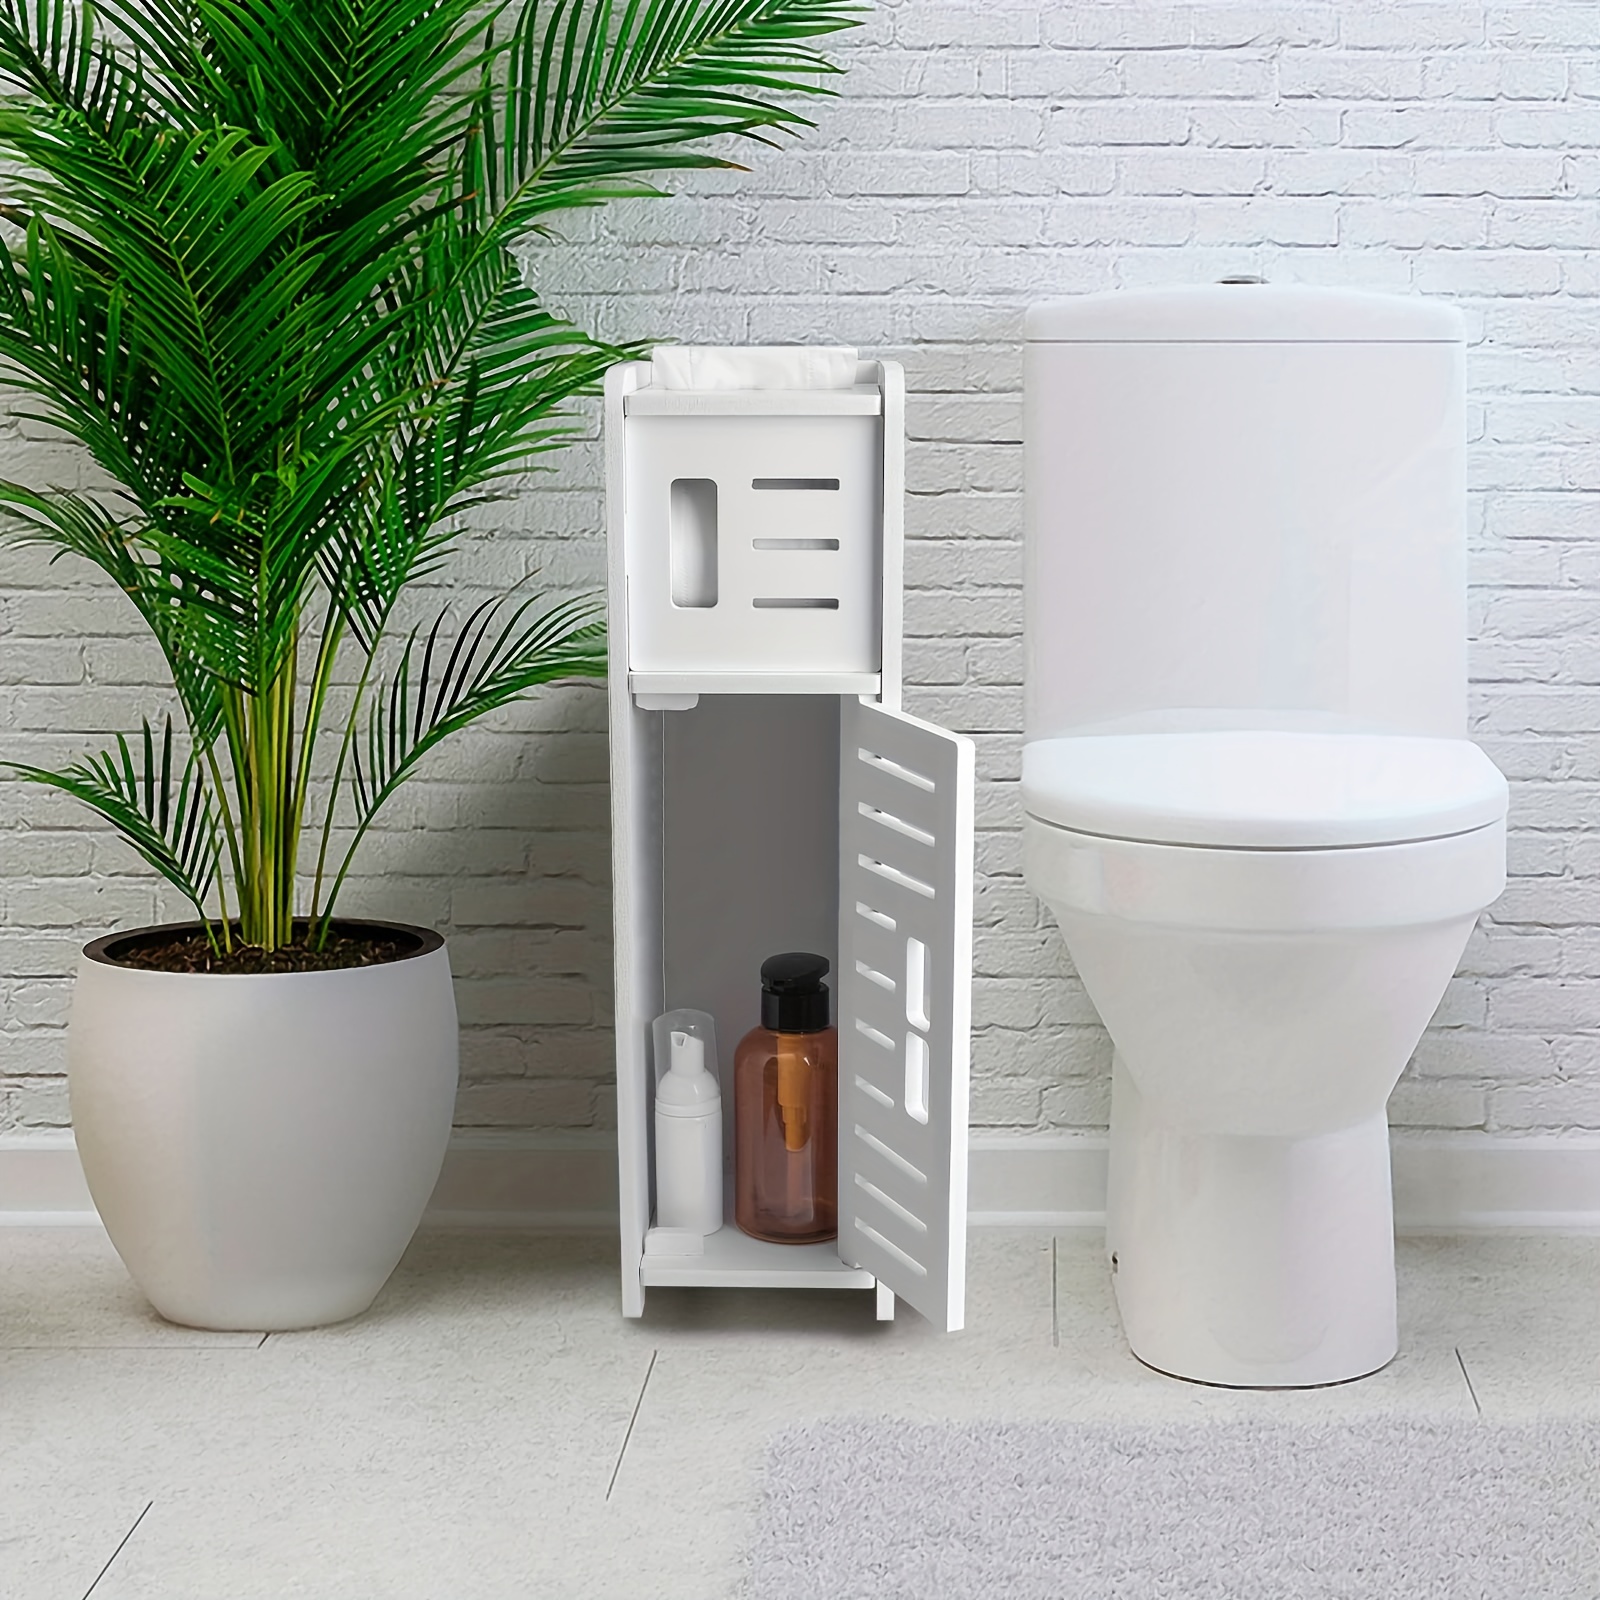 Toilet Paper Holder Stand,Small Bathroom Storage Cabinet for Toilet Paper Storage, Toilet Paper Stand Waterproof for Small Spaces by Aojezor - White